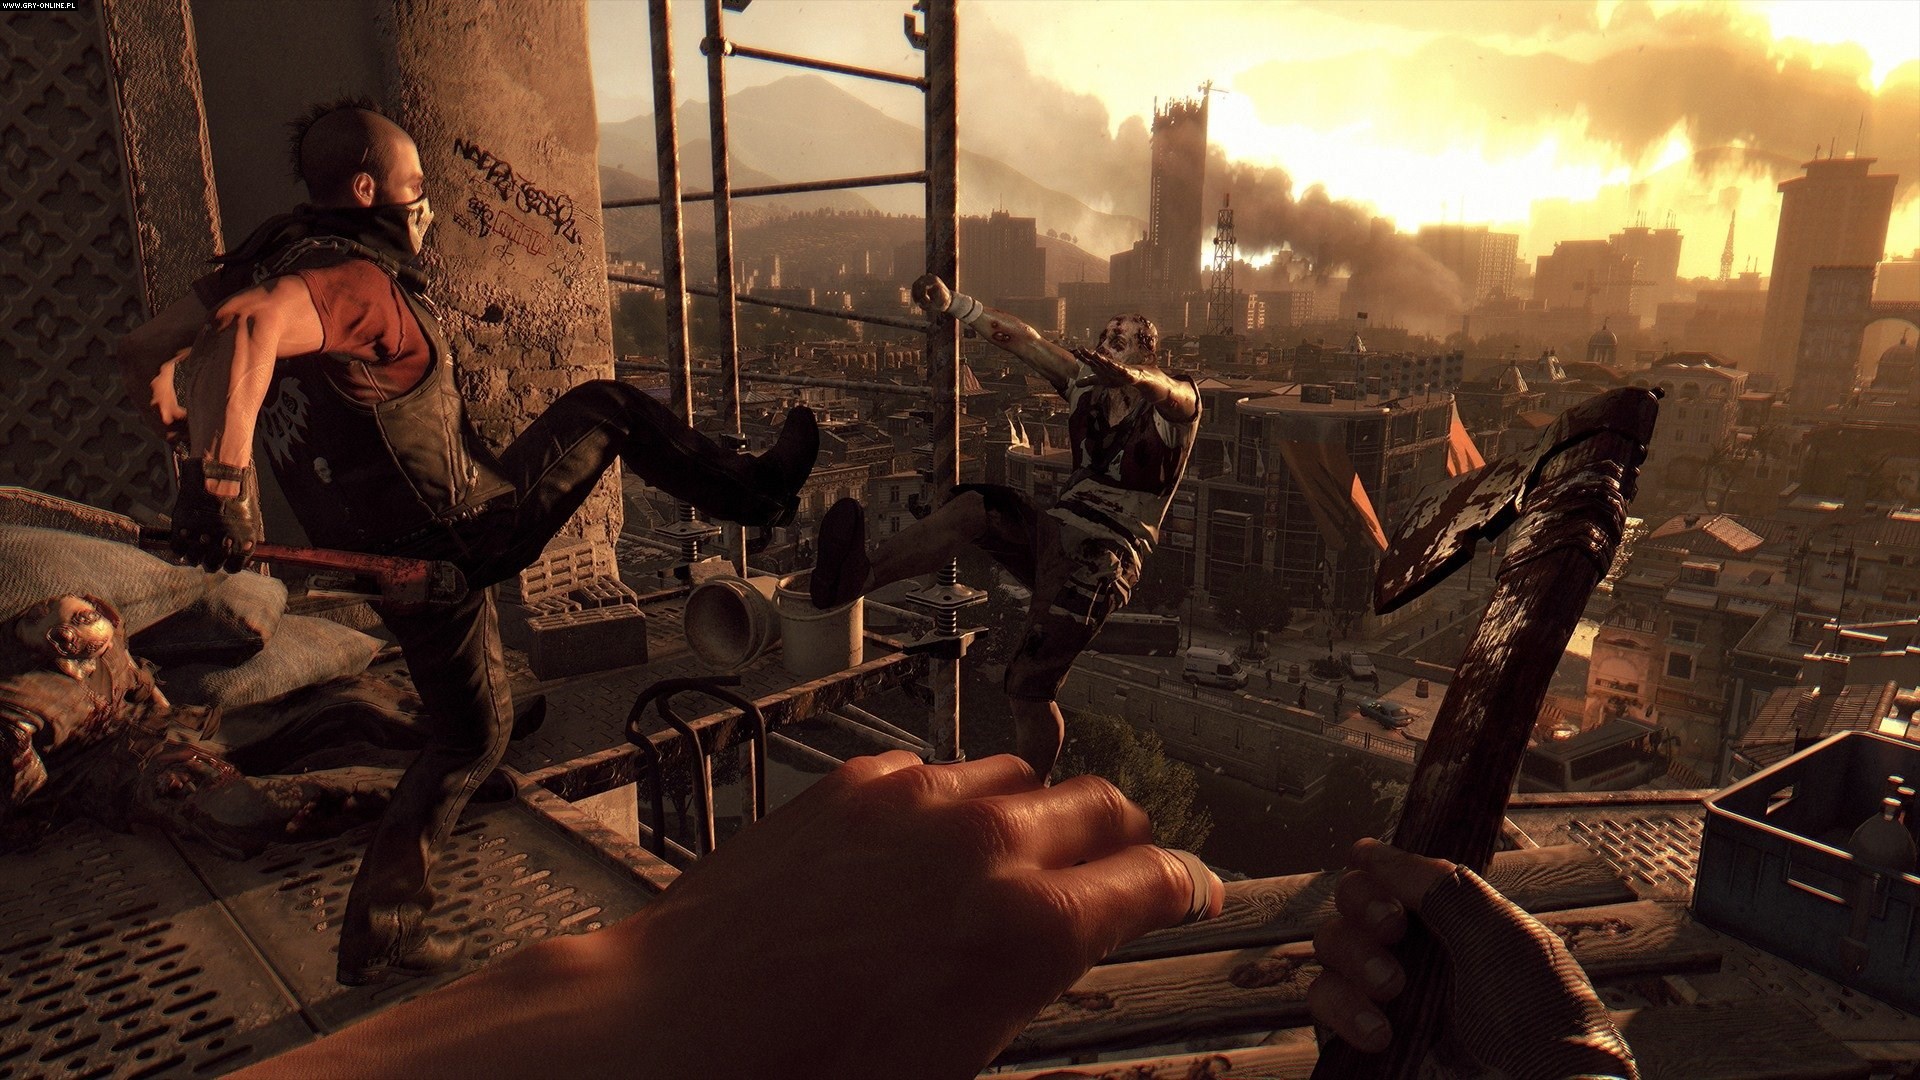 1920x1080 dying light images and pictures - dying light category